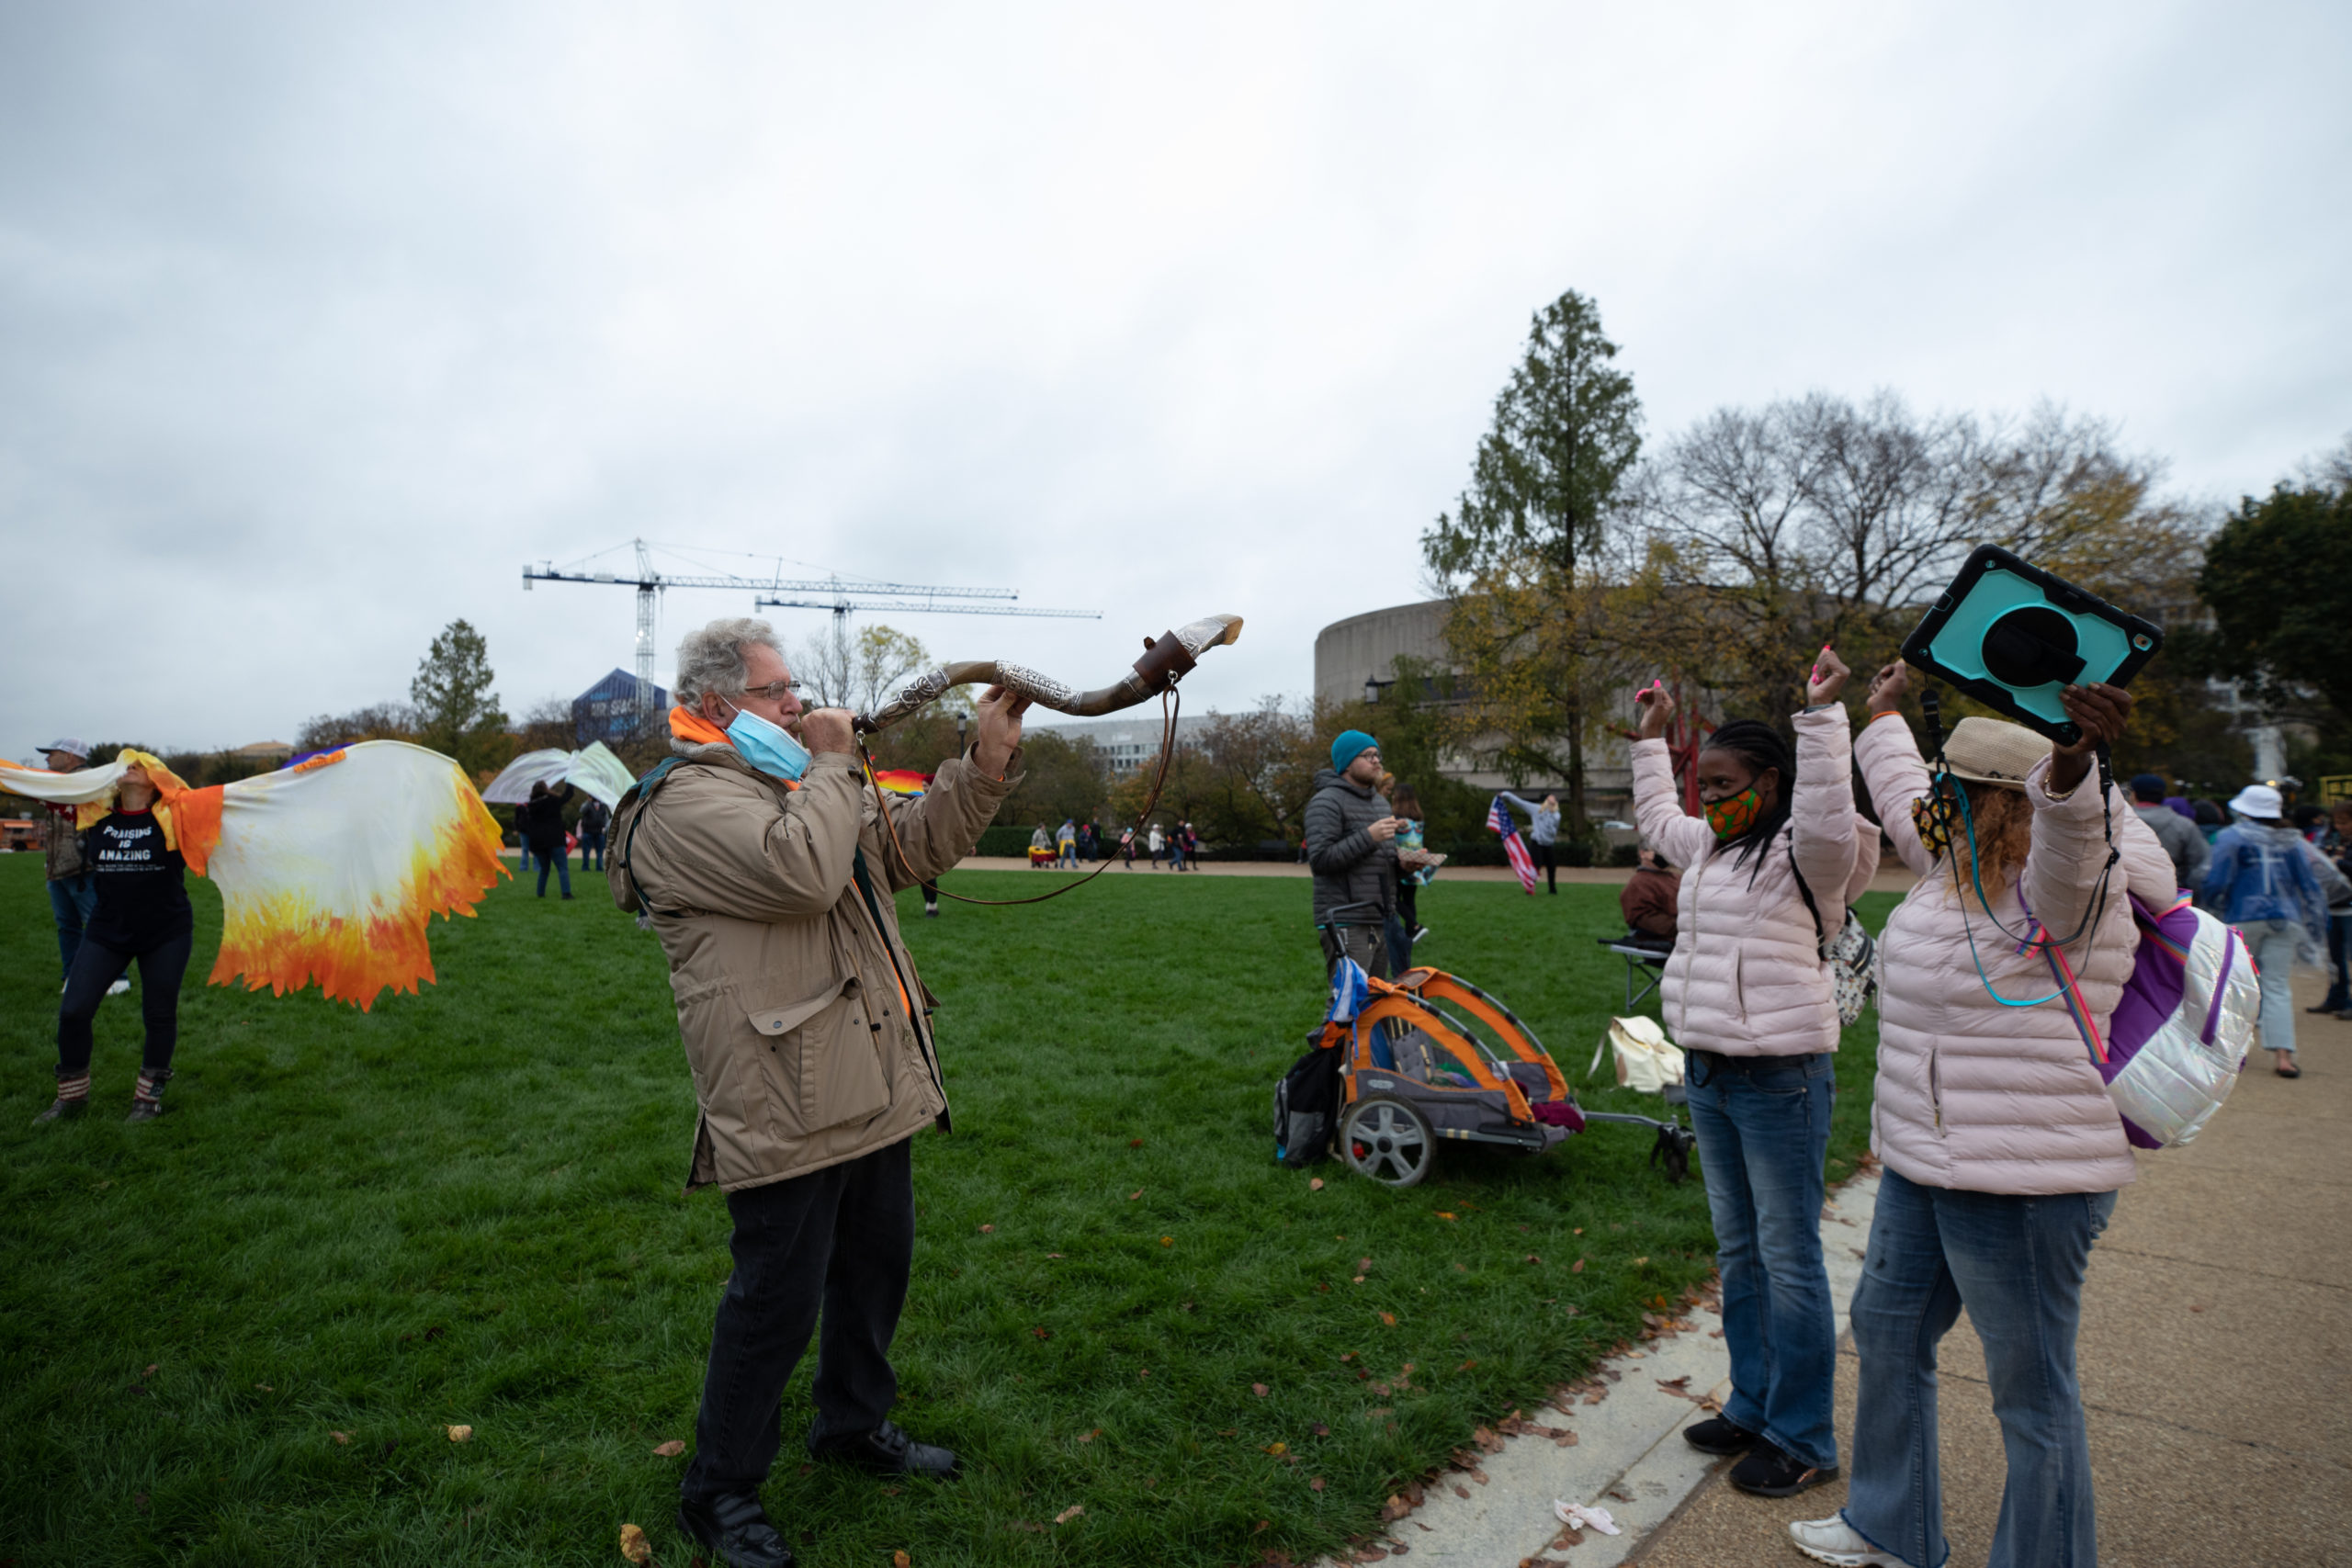 Ron Rurik of Chicago, Illinois, sounded a shofar trumpet at the "Let Us Worship" protest in Washington, D.C. on October 25, 2020. (Kaylee Greenlee - DCNF)